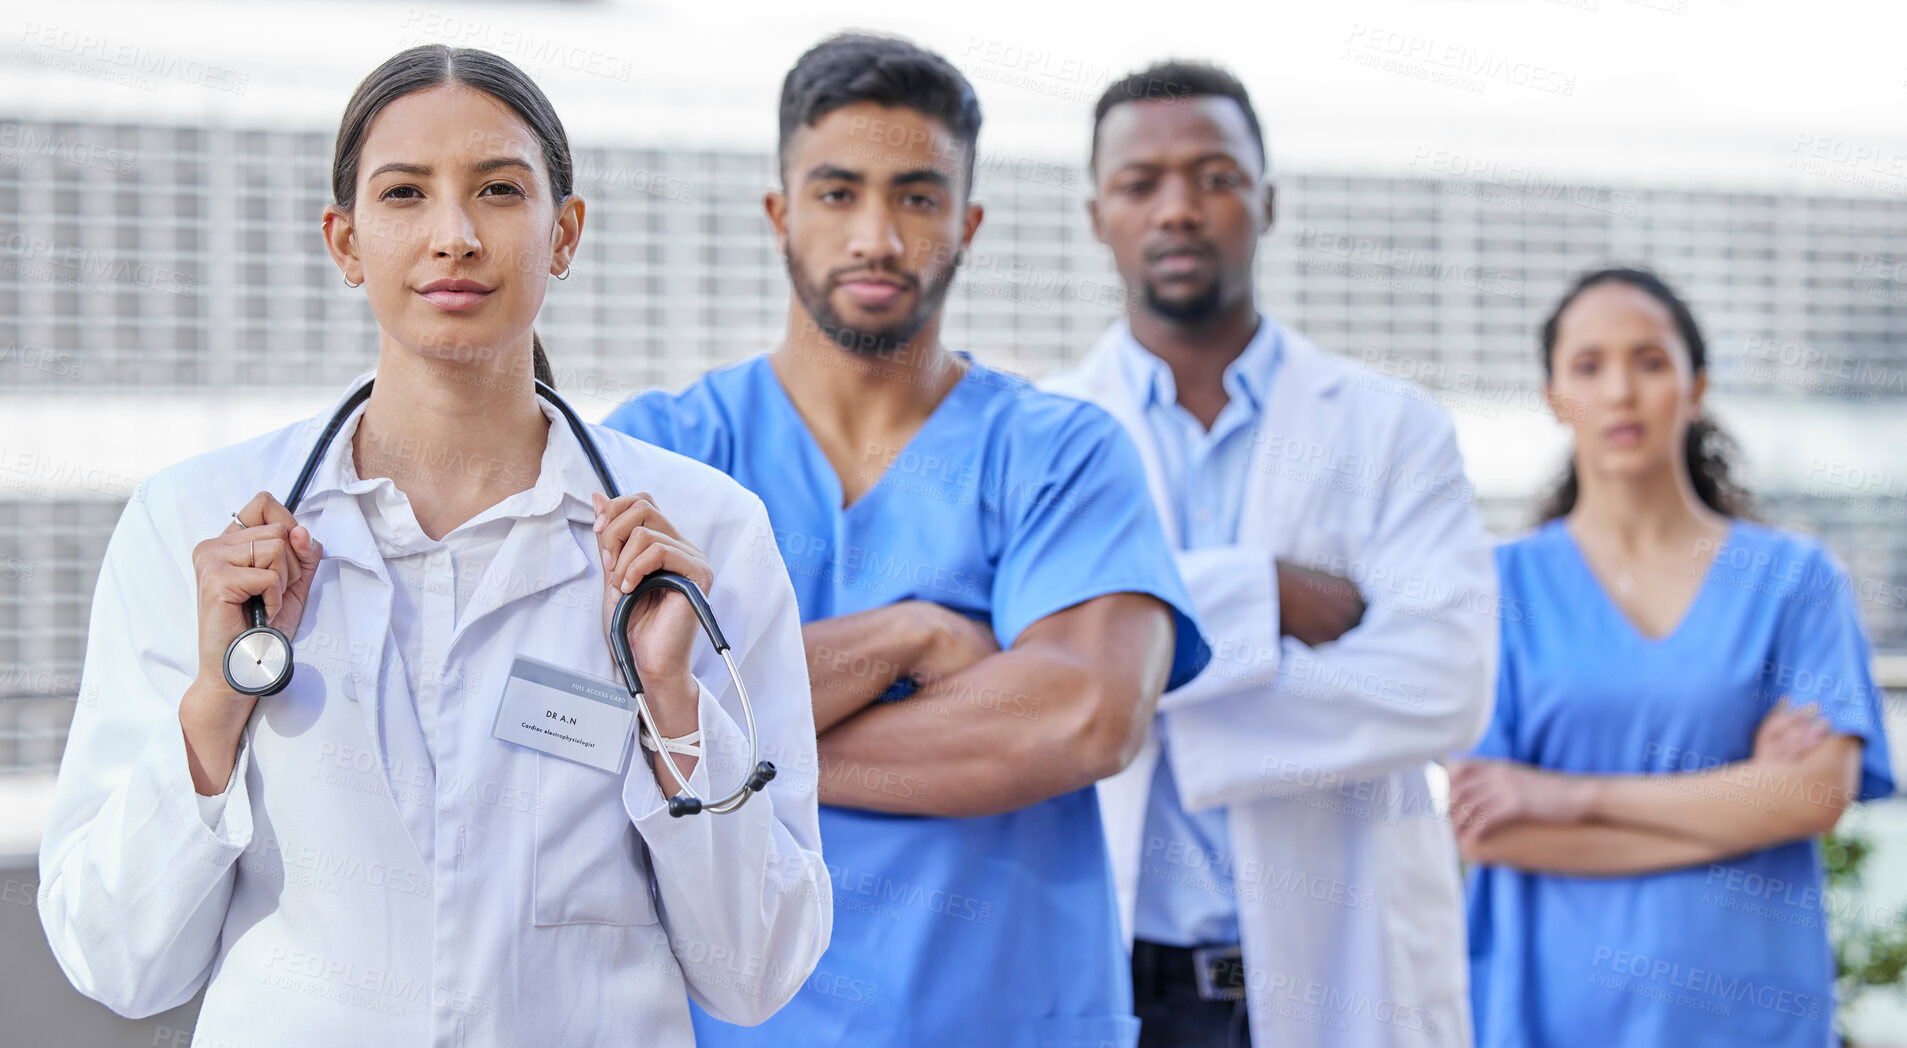 Buy stock photo Doctors, outdoor and confident portrait for support, medical service and healthcare solidarity. Collaboration, unity and teamwork or trust in staff or employees, medicine and proud of insurance